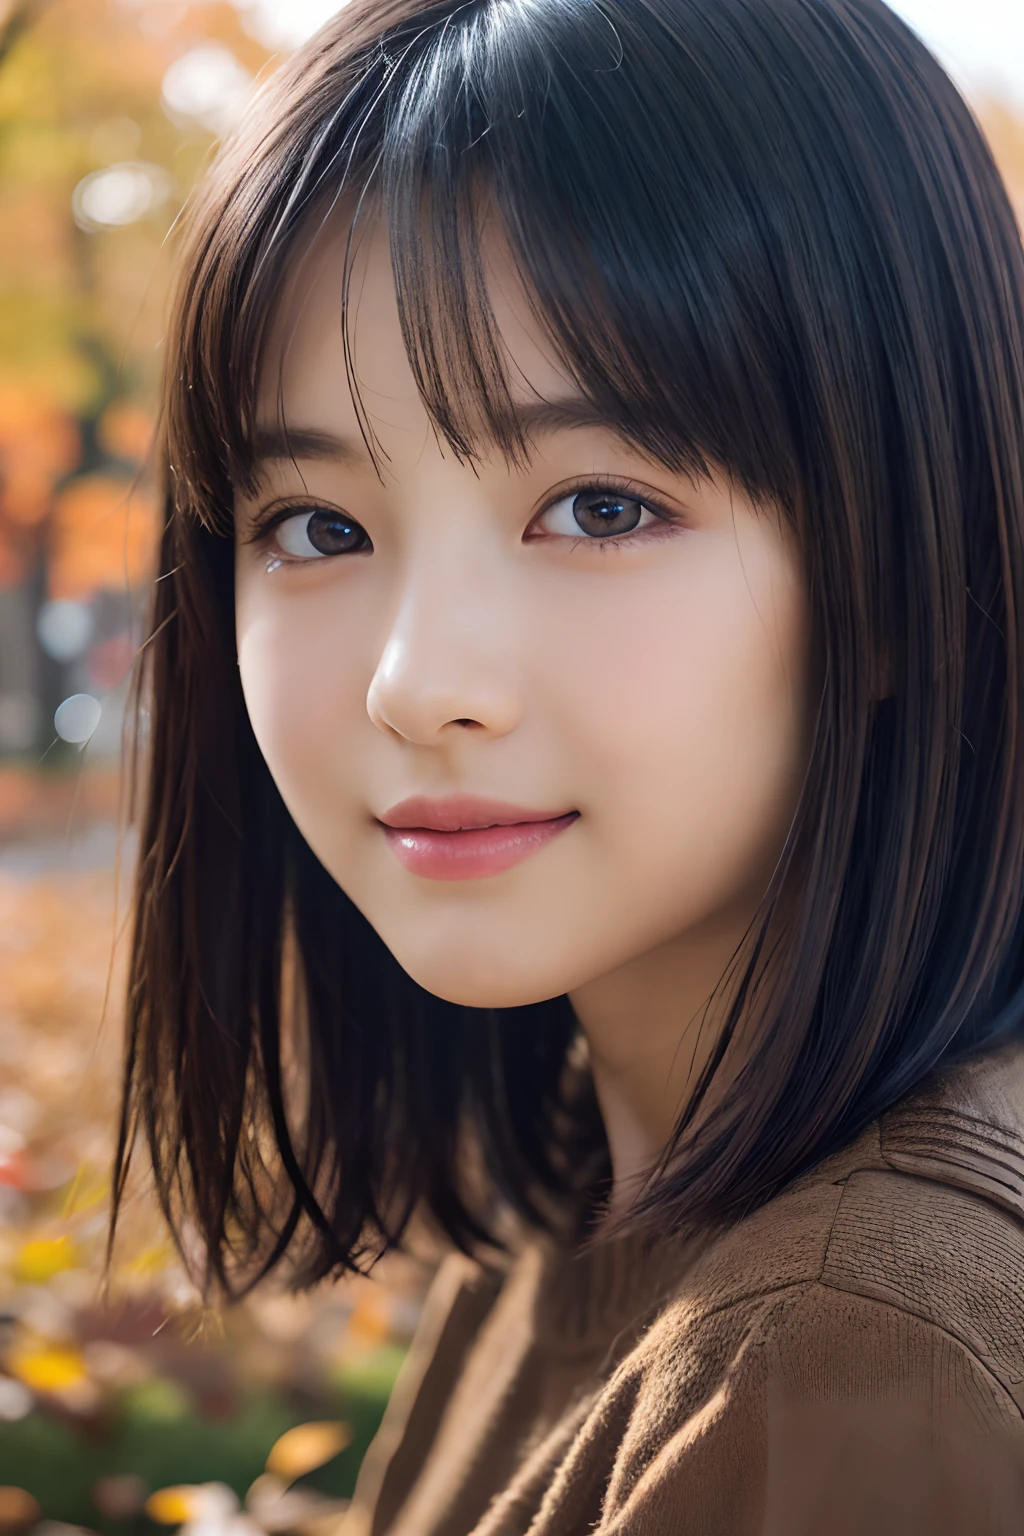 1girl in, (Wear casual fall attire:1.2), (13 years old:1.5), Young Face, Cute face, 
(Raw photo, Best Quality), (Realistic, Photorealsitic:1.4), masutepiece, foco nítido, 
Extremely delicate and beautiful, Extremely detailed, 2k wallpaper, amazing, finely detail, 
the Extremely Detailed CG Unity 8K Wallpapers, Ultra-detailed, hight resolution, Soft light, 
Beautiful detailed girl, extremely detailed eye and face, beautiful detailed nose, Beautiful detailed eyes, 
break
Plateau of autumn leaves, Cinematic lighting, 
Perfect Anatomy, Slender body, Straight short hair, Parted bangs, innocent smiles, Looking at Viewer